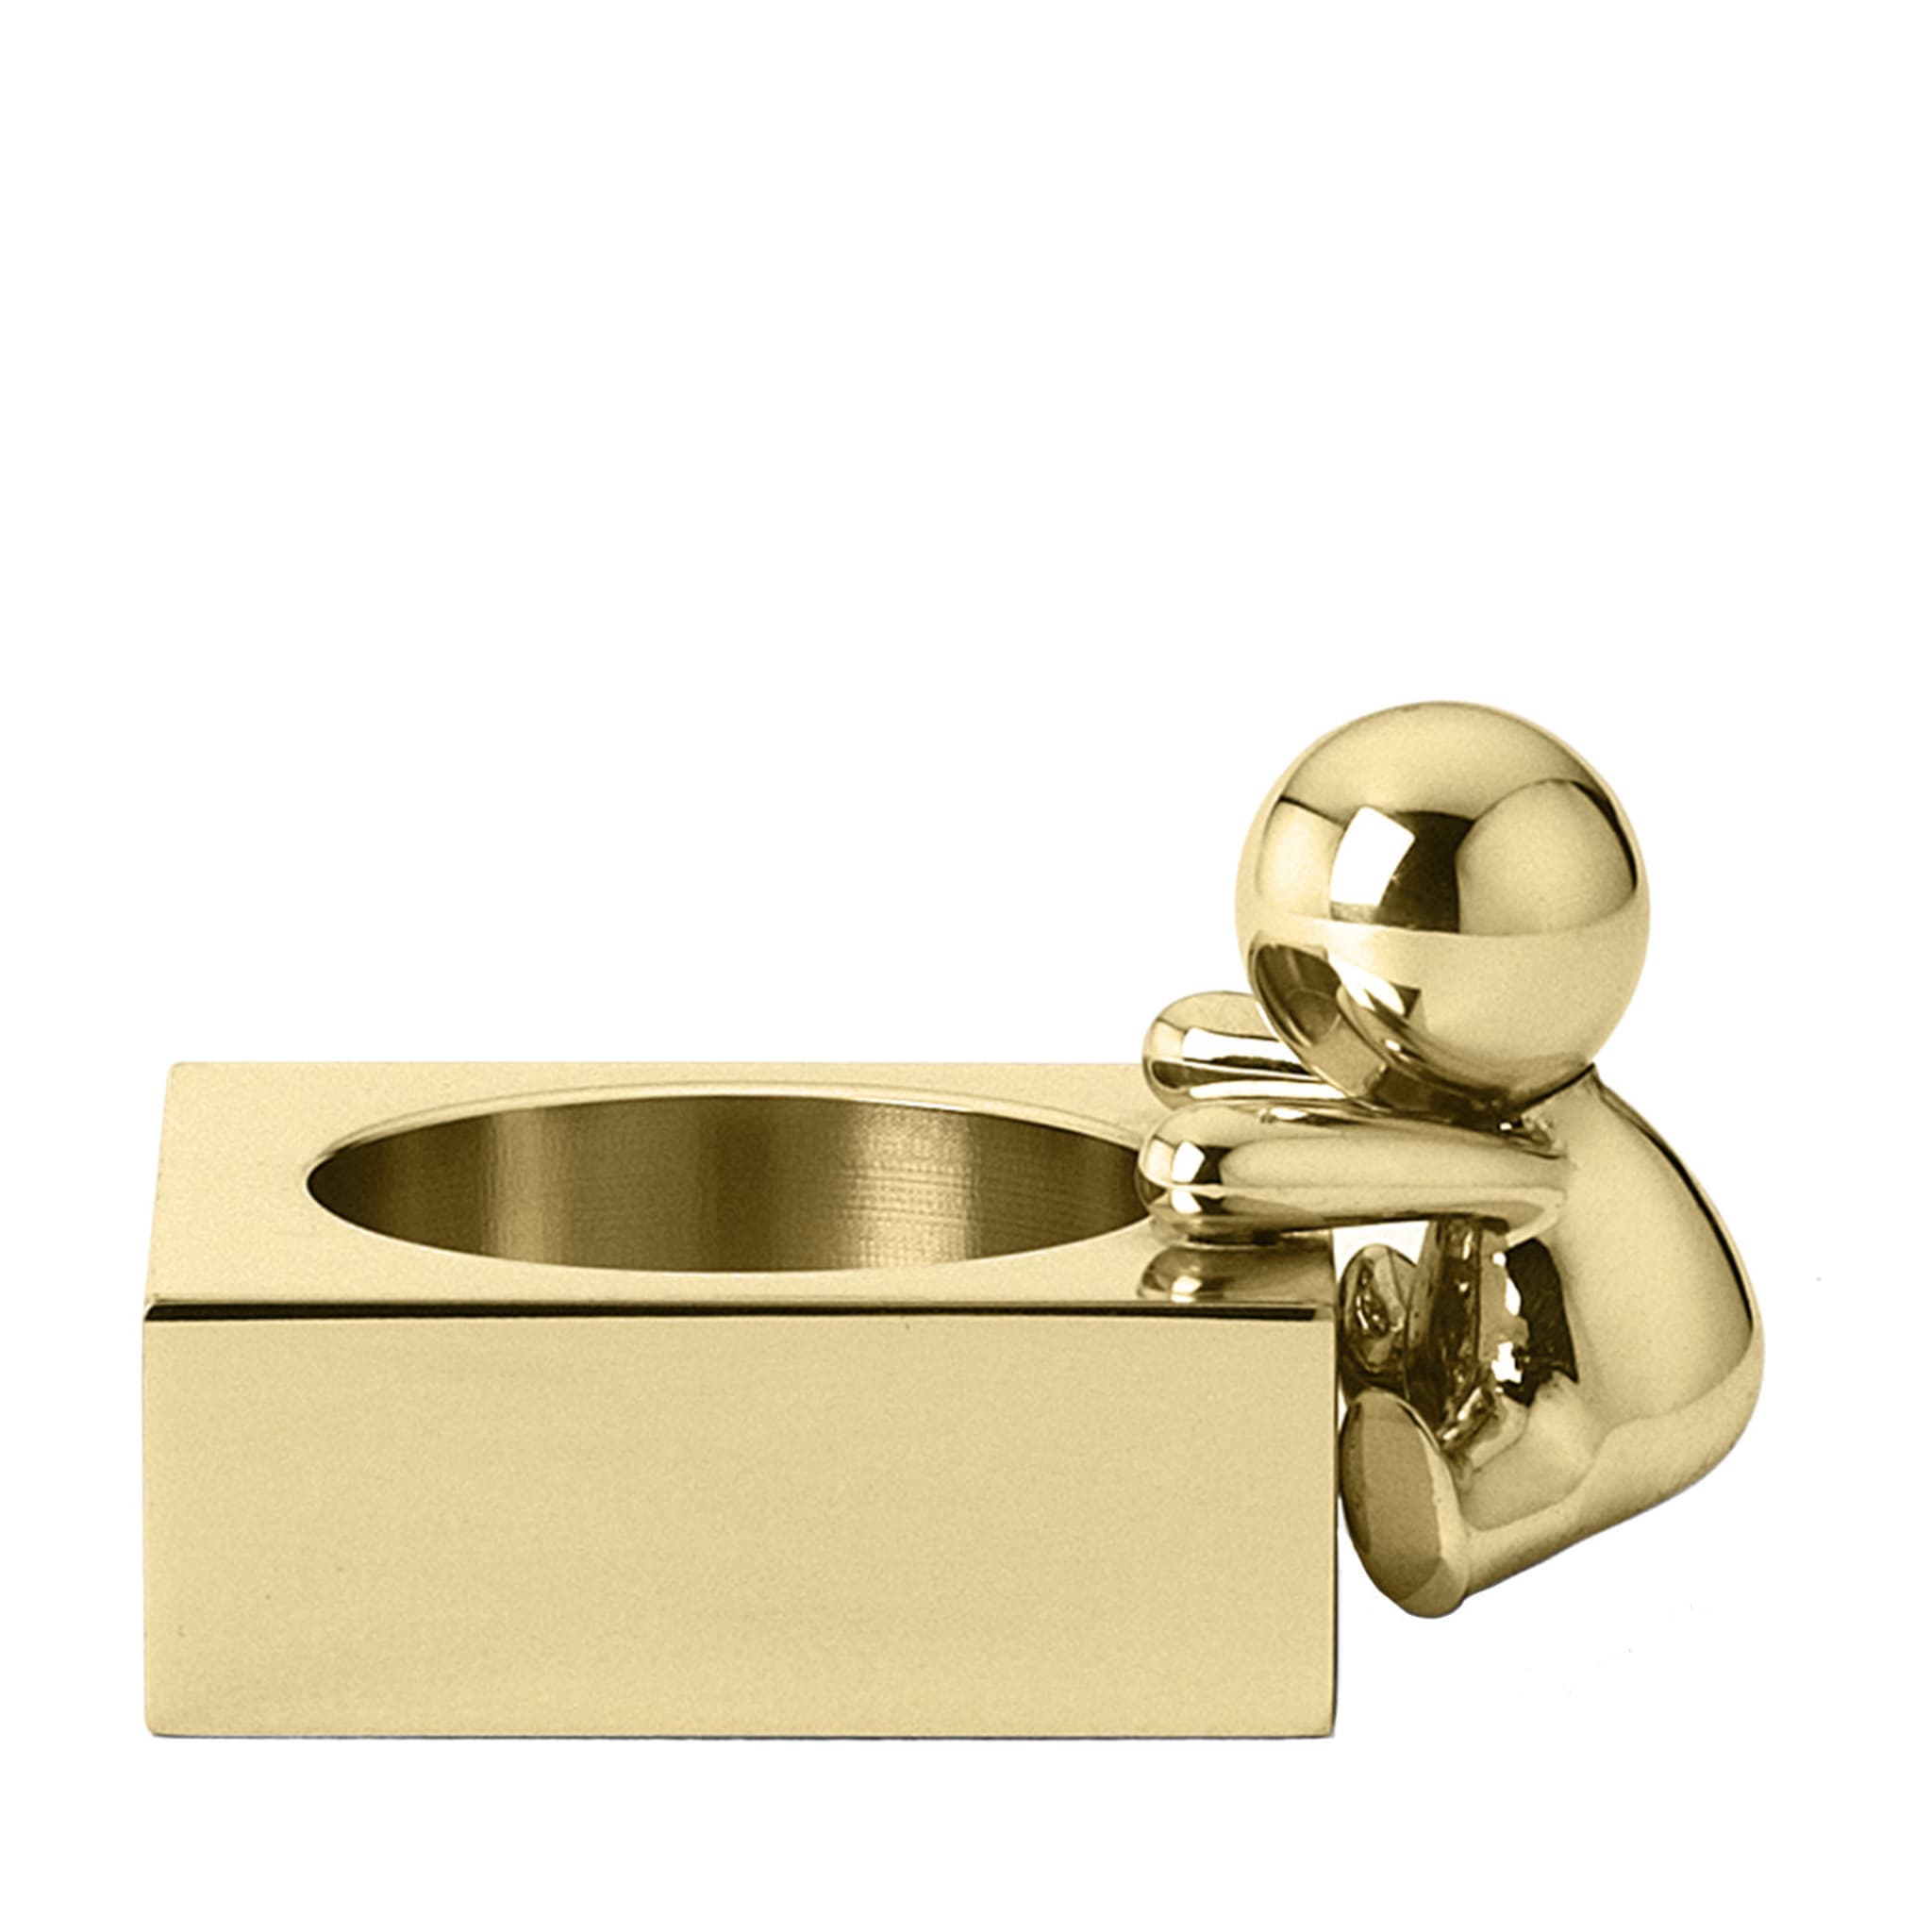 Omini Squared Tea Light holder in Polished Brass By Stefano Giovannoni - Main view